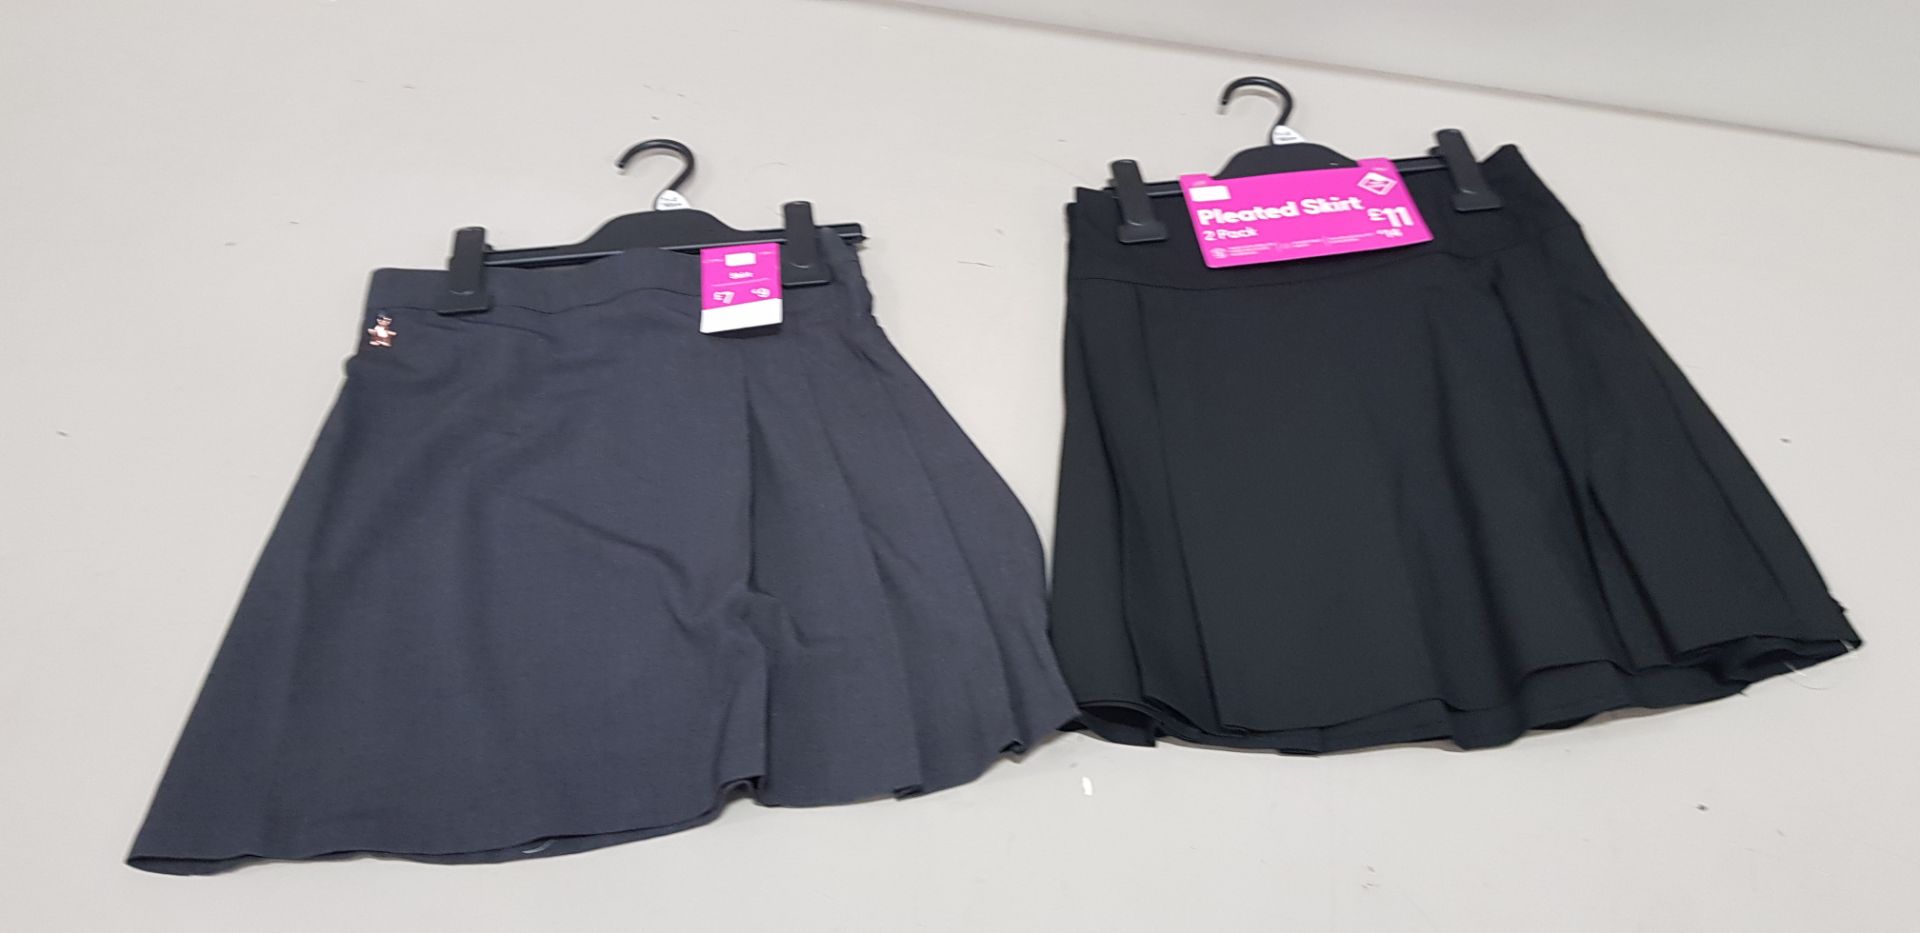 56 X MIXED SKIRT LOT TO INCLUDE 23 X BRAND NEW F&F PACKS OF 2 PLEATED SKIRTS ALL IN GREY ALL IN